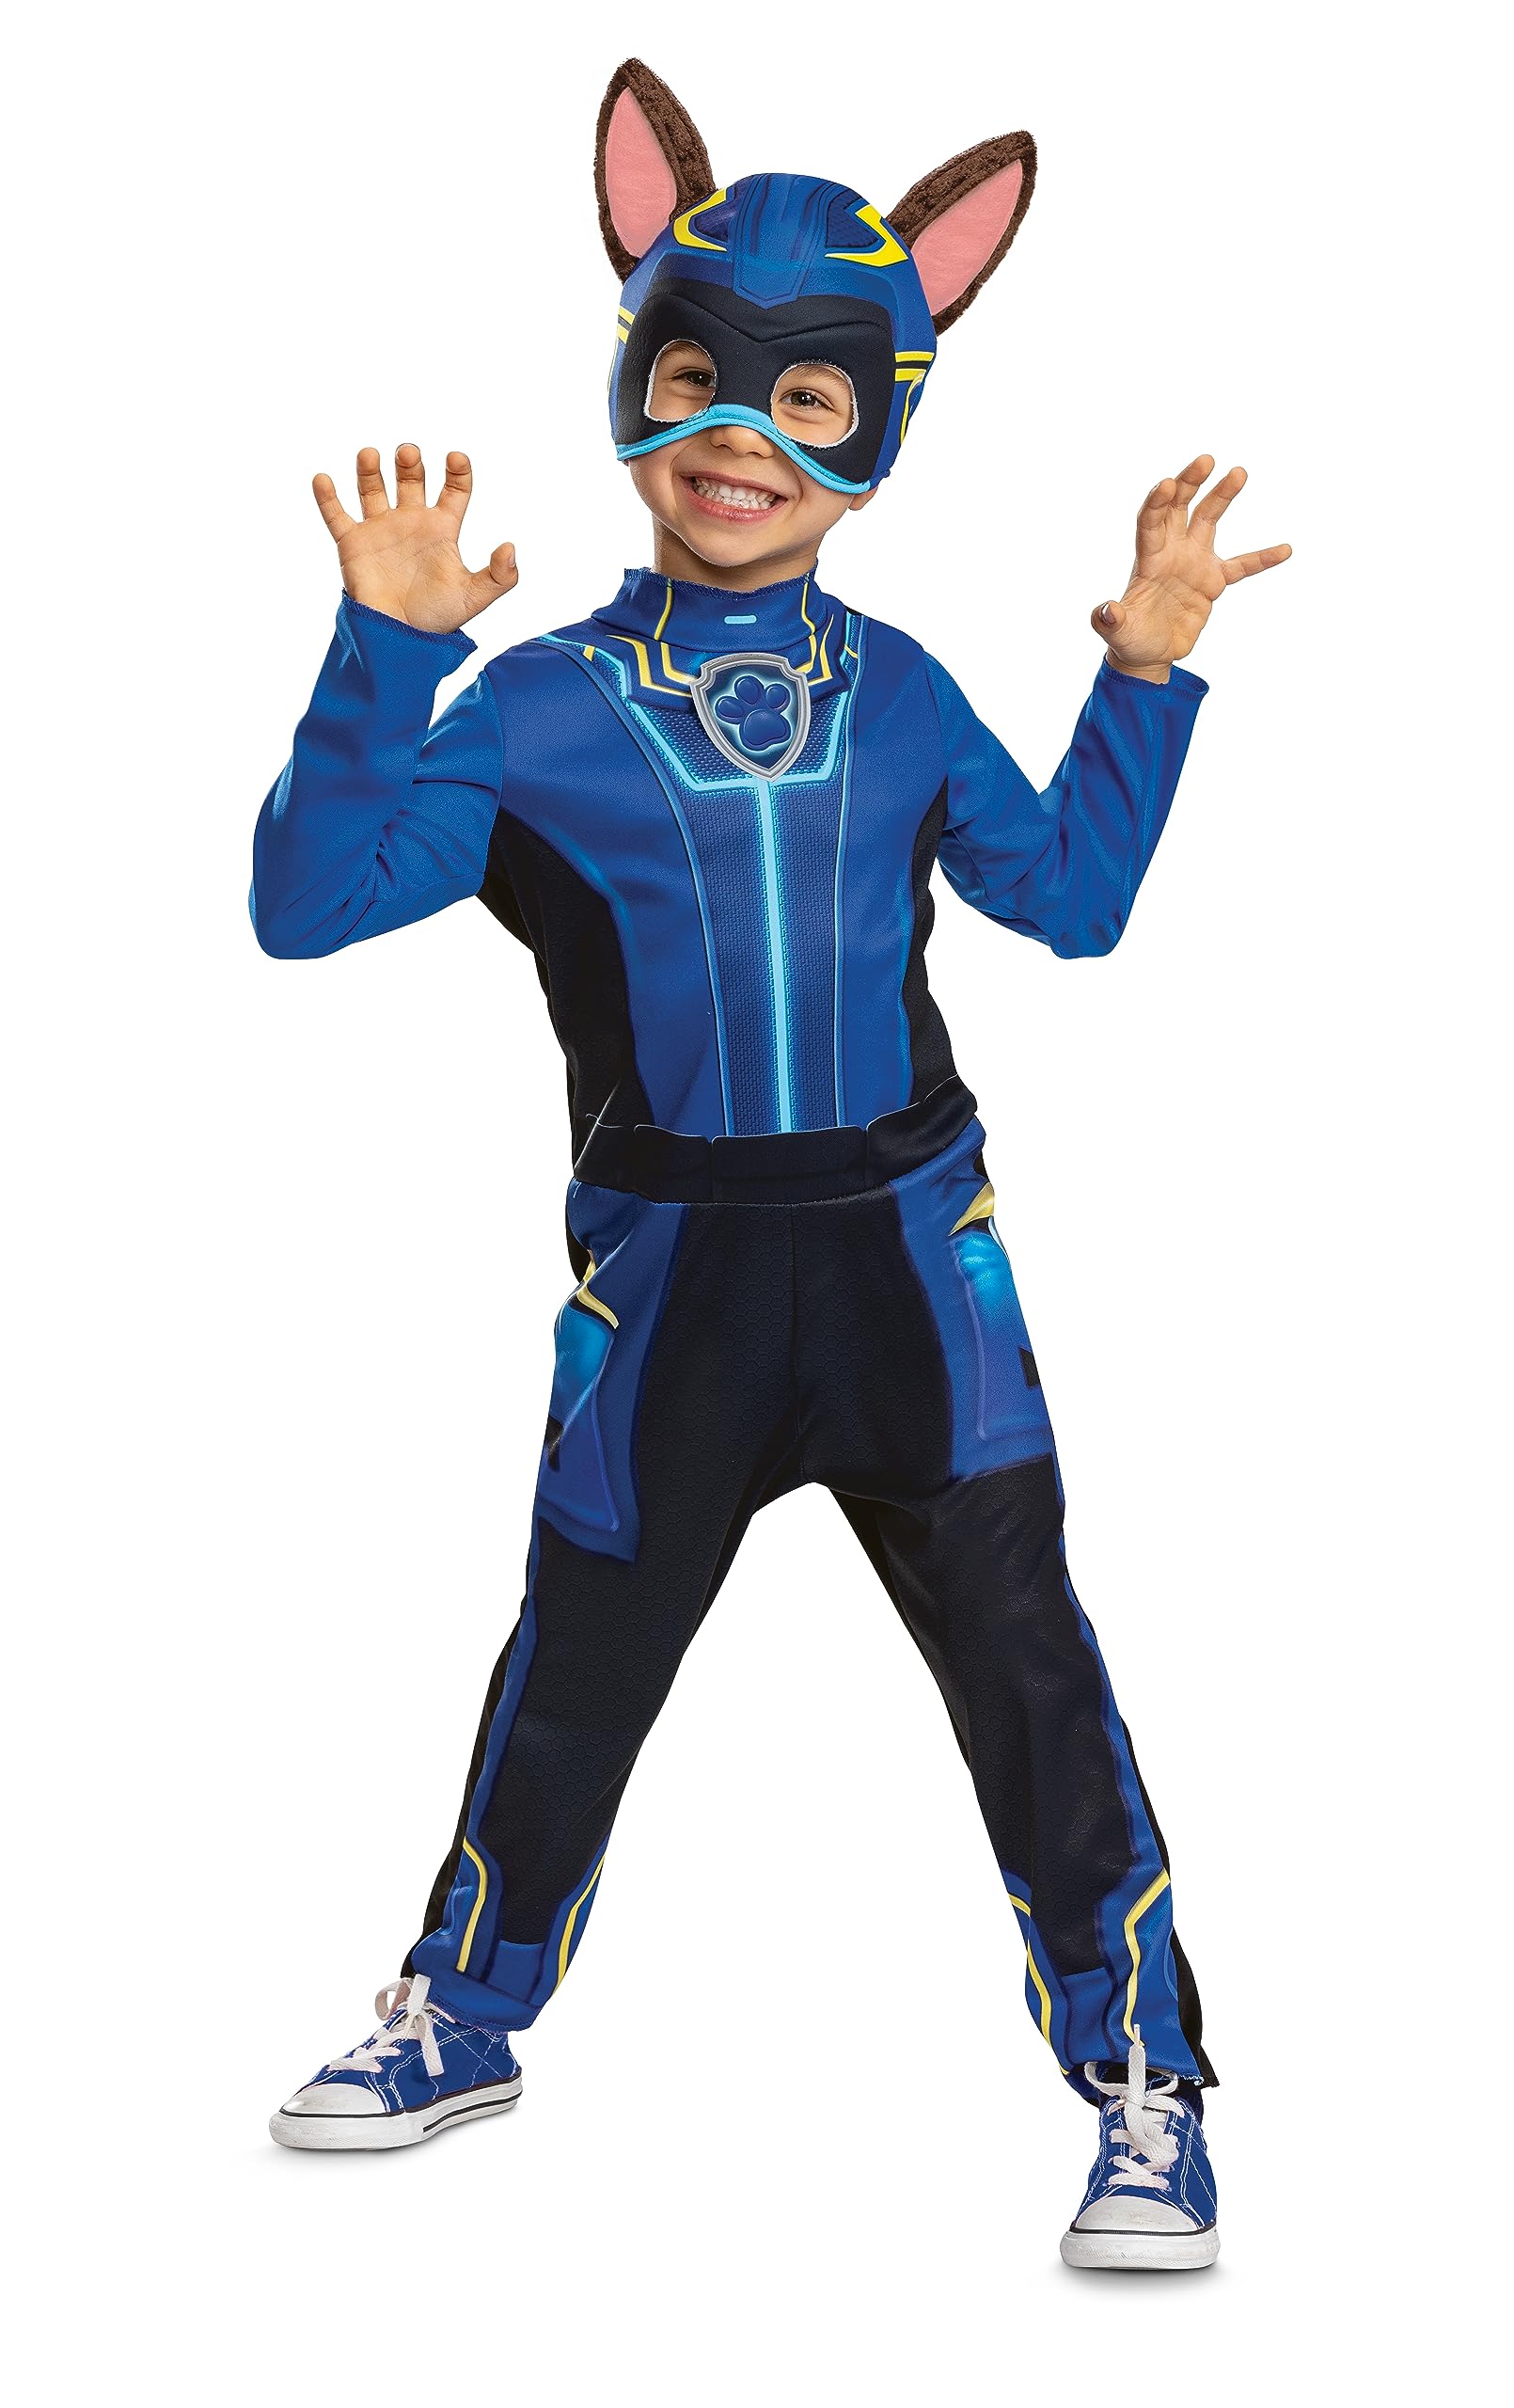 Disguise boys Chase Paw Patrol Costume, Official Toddler Paw Patrol Halloween Outfit With Headpiece for Kids